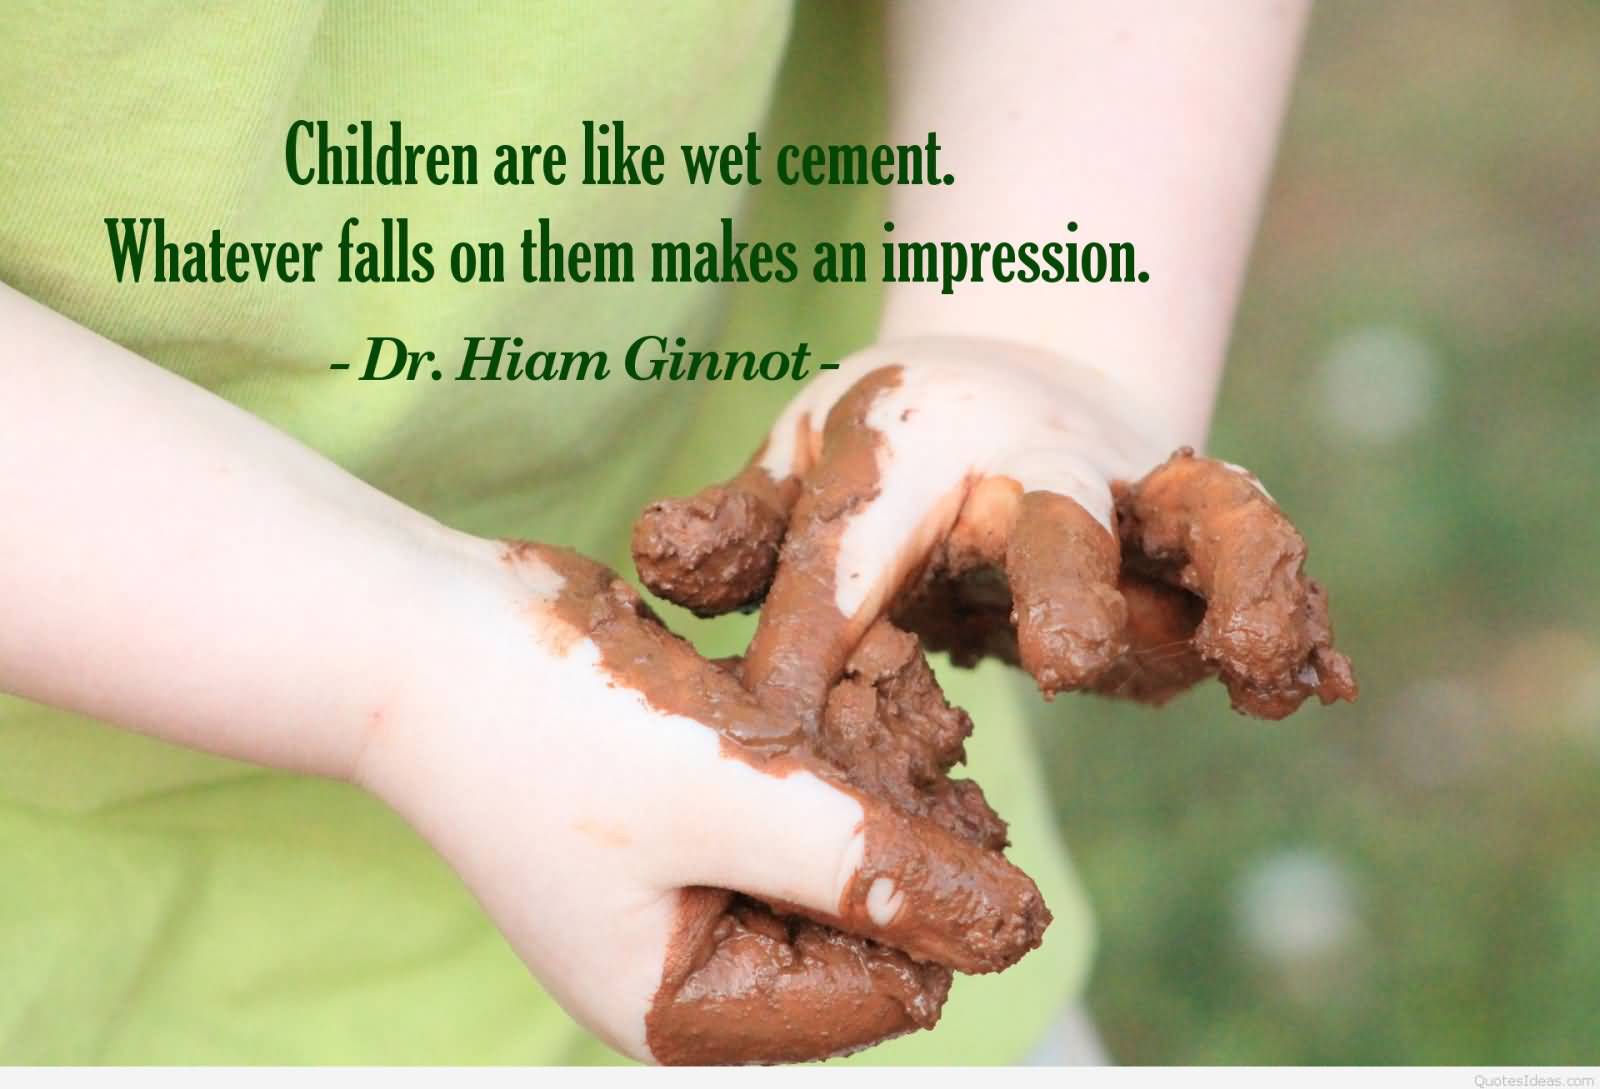 Children are like wet cement. Whatever falls on them makes an impression -Dr. Hiam Ginnot